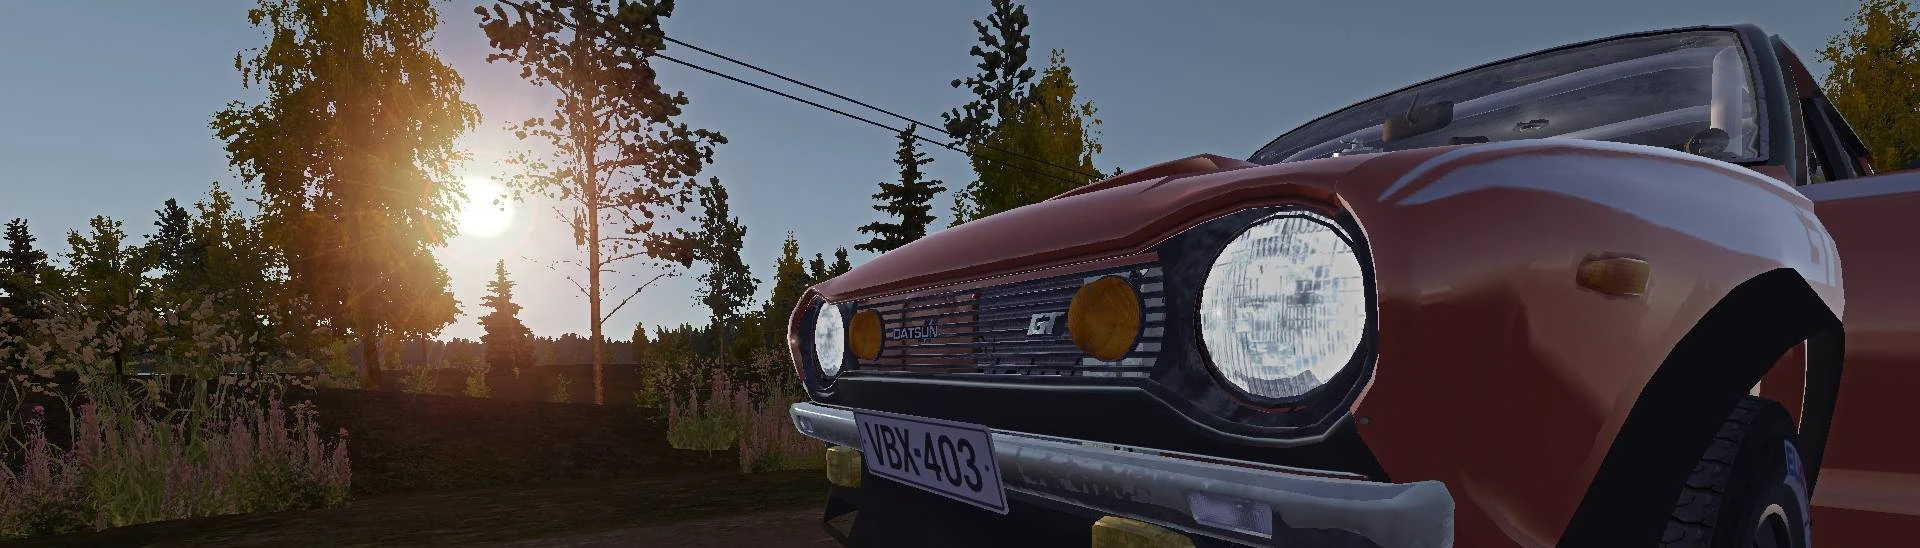 My-Summer-Car-Save-File-With-Everything-You-Want at My Summer Car